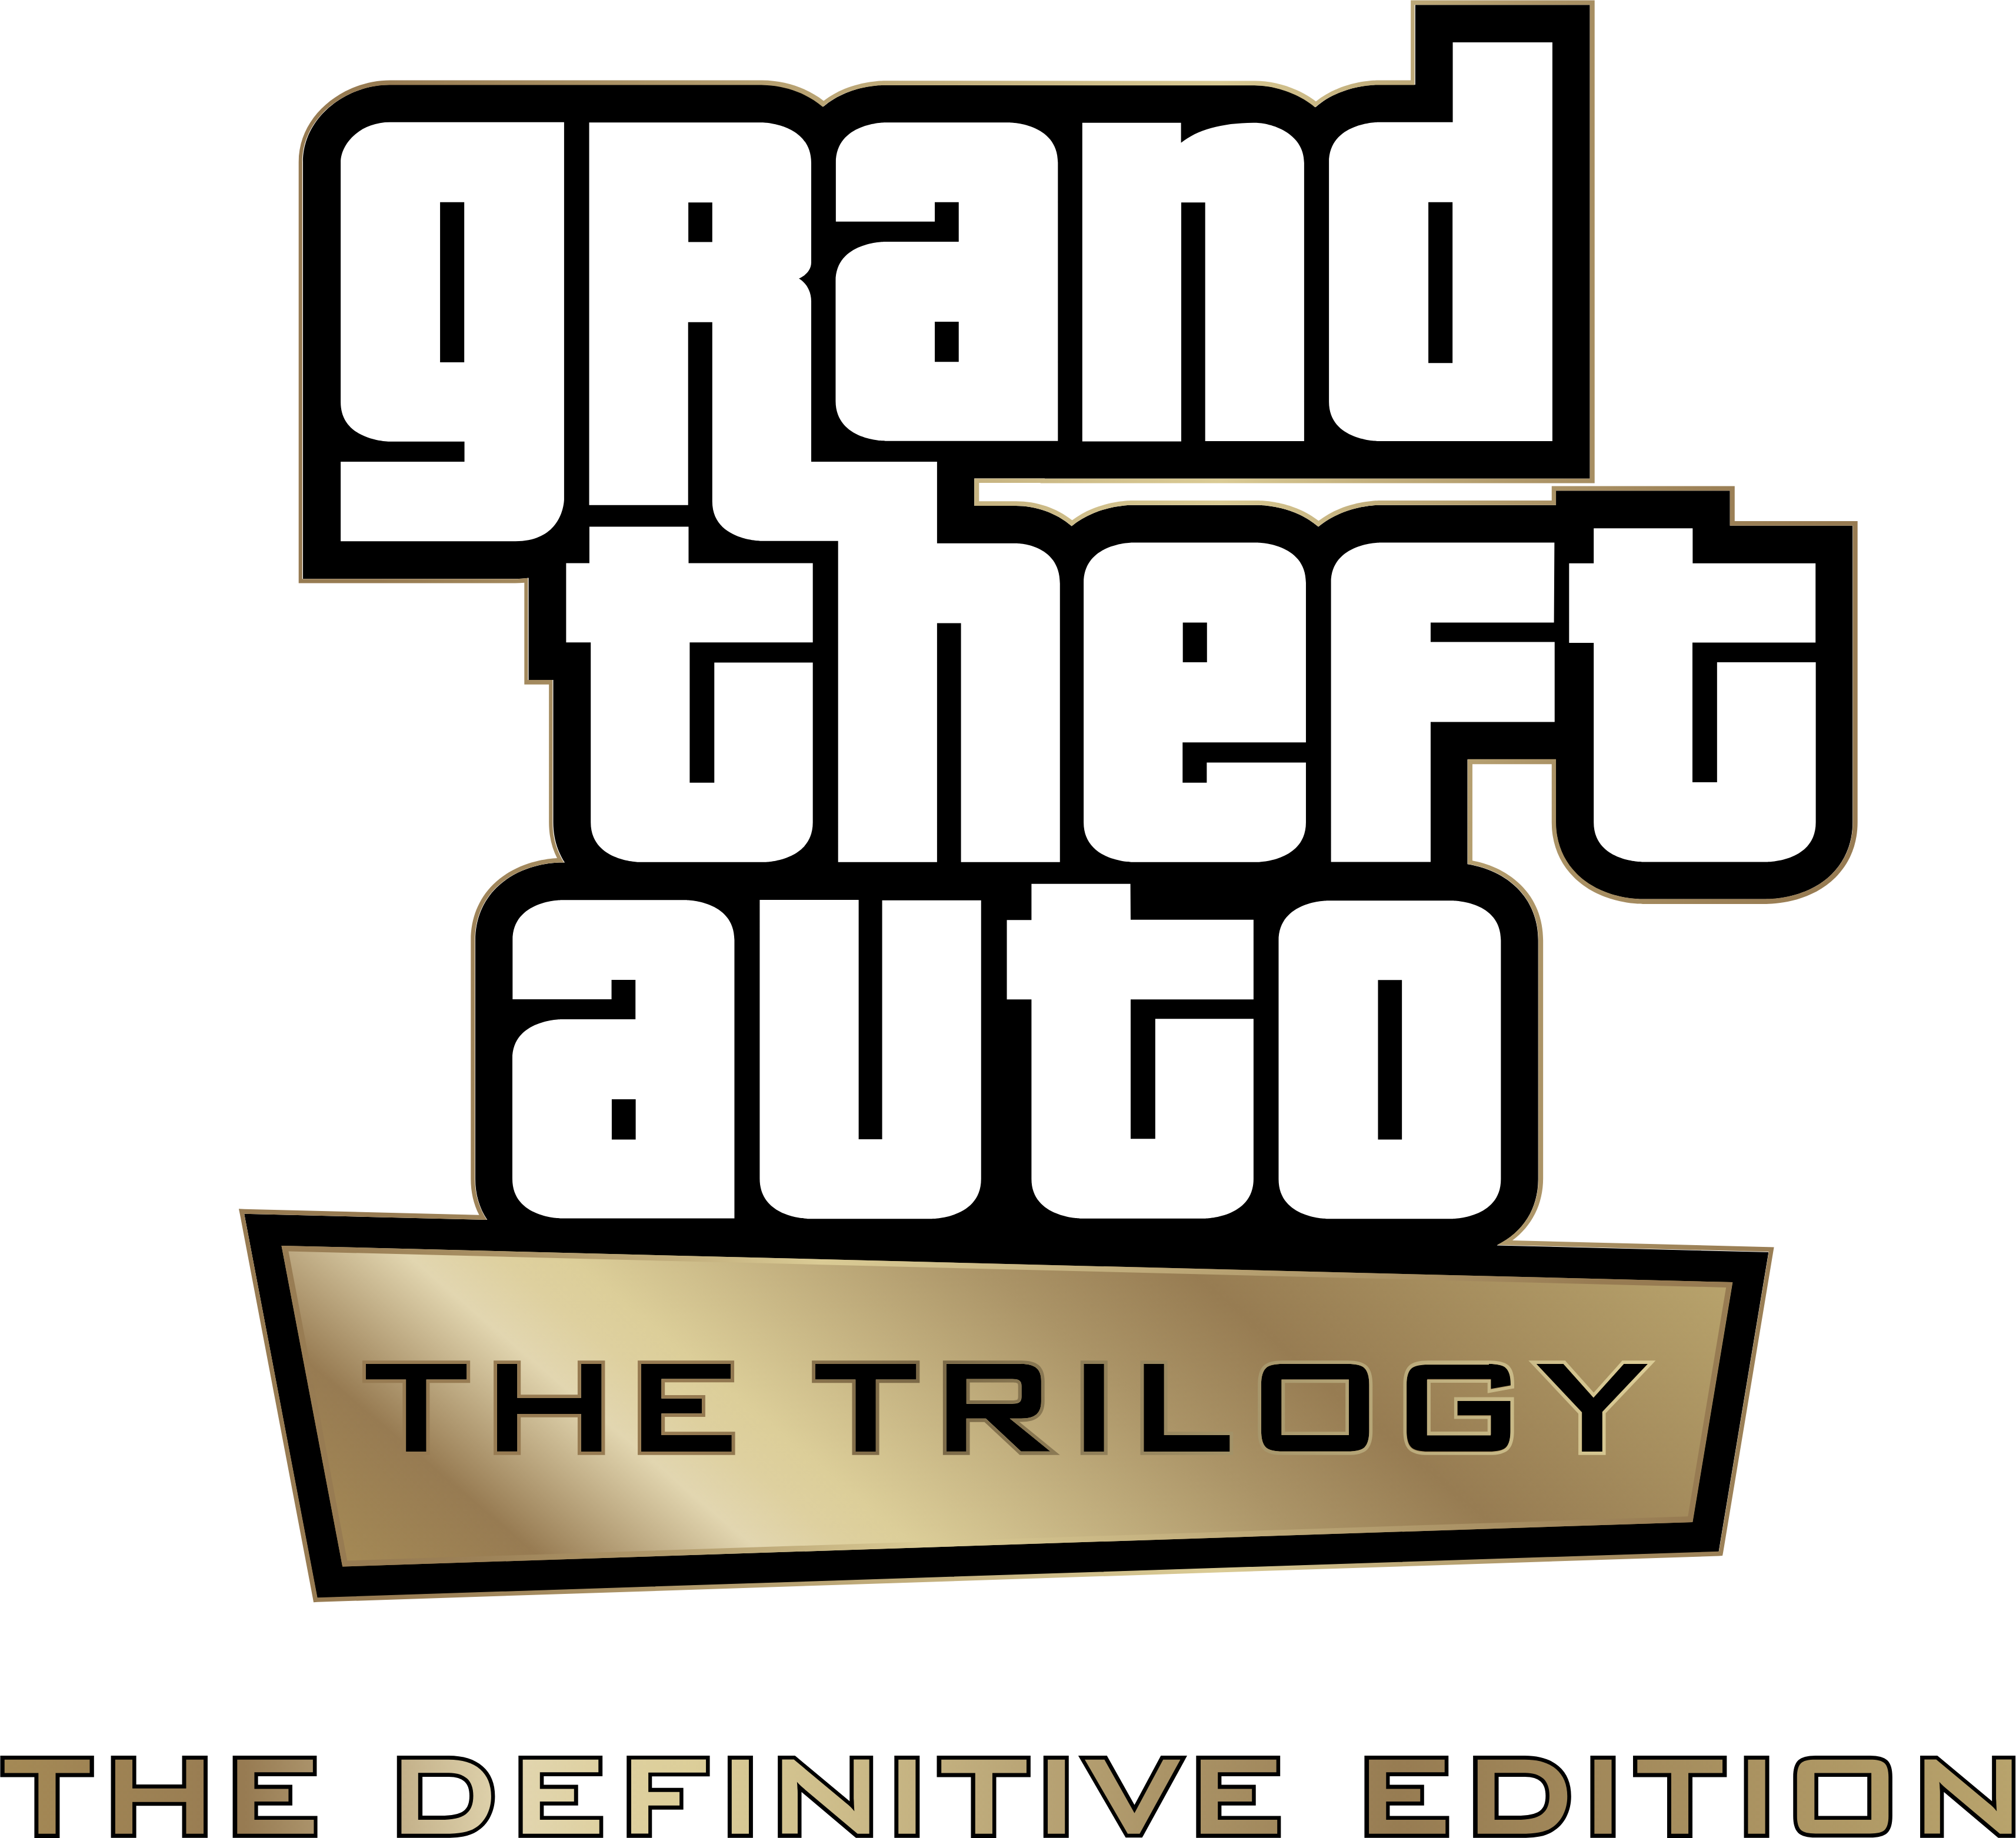 Grand Theft Auto III – The Definitive Edition - SteamGridDB